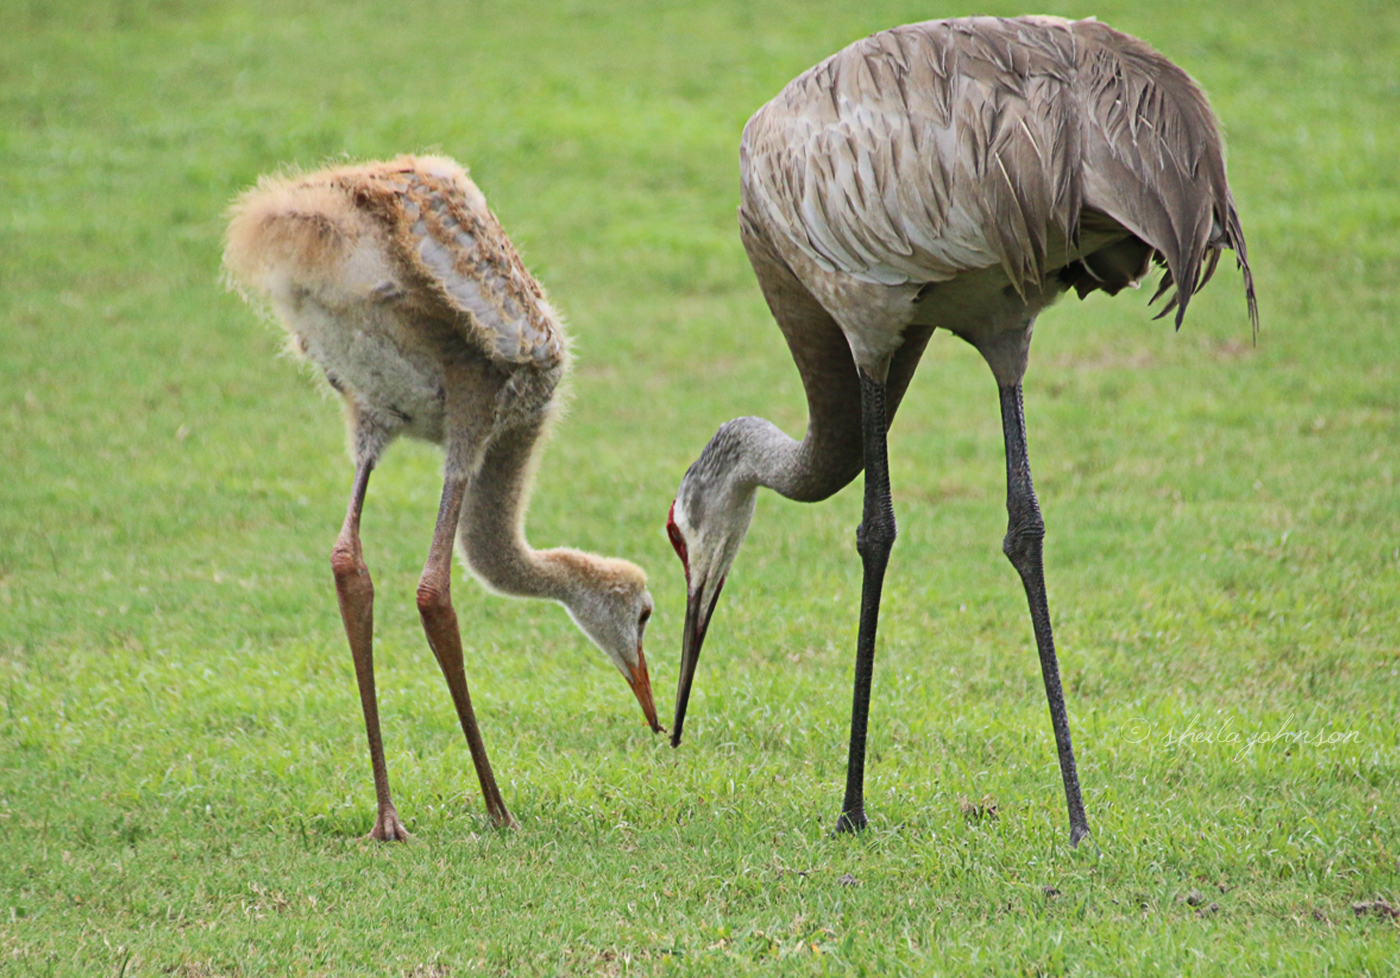 When There Are No Soccer Or Baseball Games At Halpatioke Regional Park In Stuart, Florida, Sandhill Cranes Are Often Found Feasting On Worms And Such On The Fields. Sandhill Cranes Juveniles Stay With Their Parents For As Long A 12 Months After Hatching.